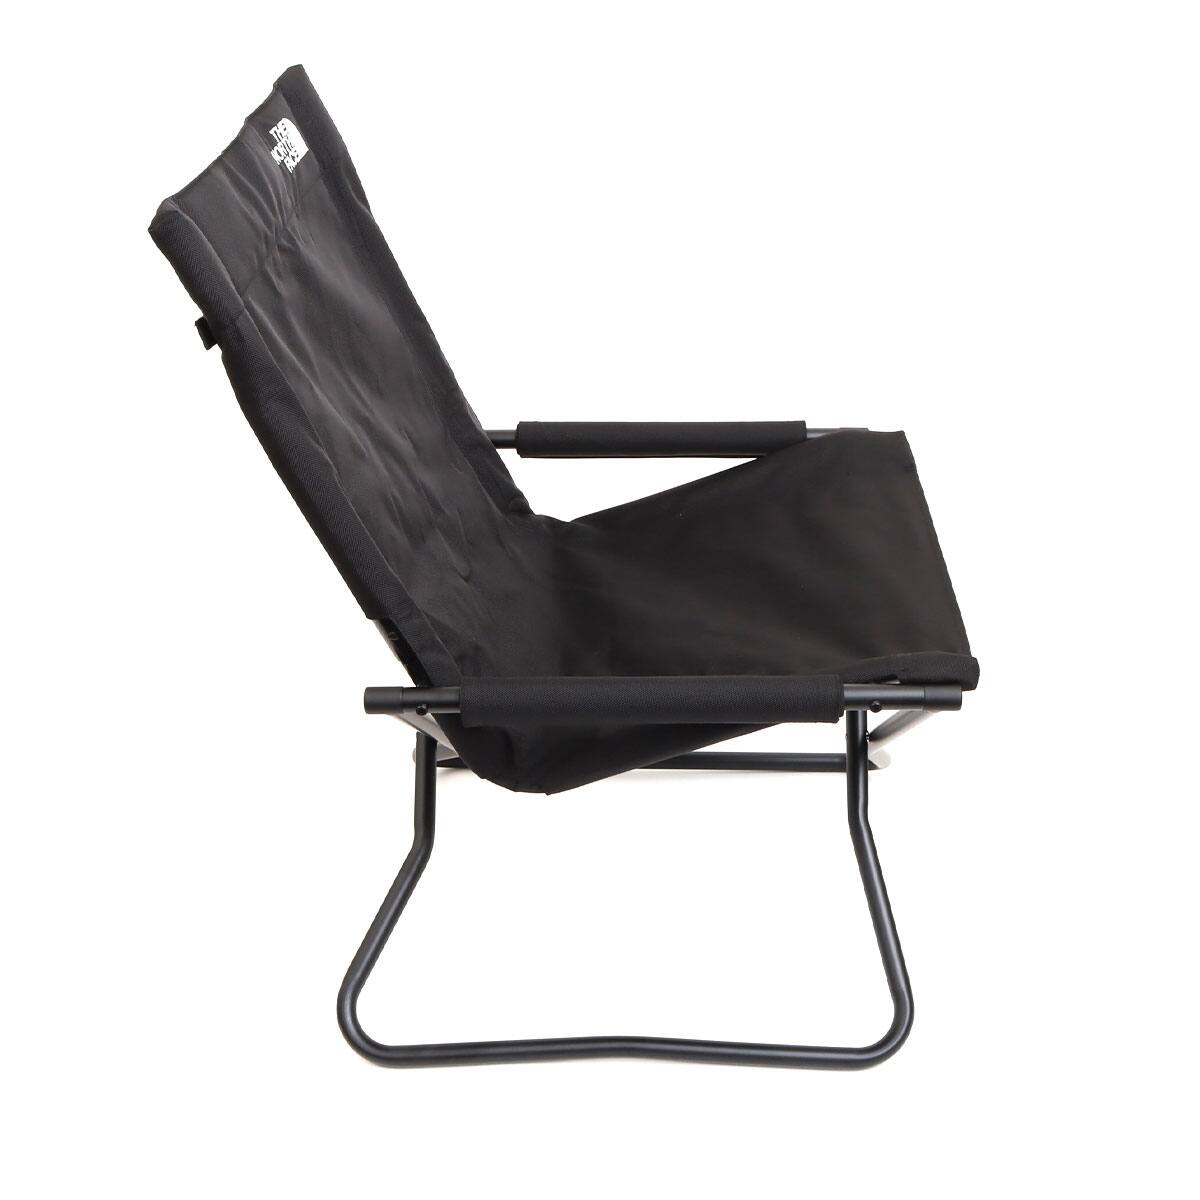 THE NORTH FACE TNF CAMP CHAIR BLACK 22SS-I